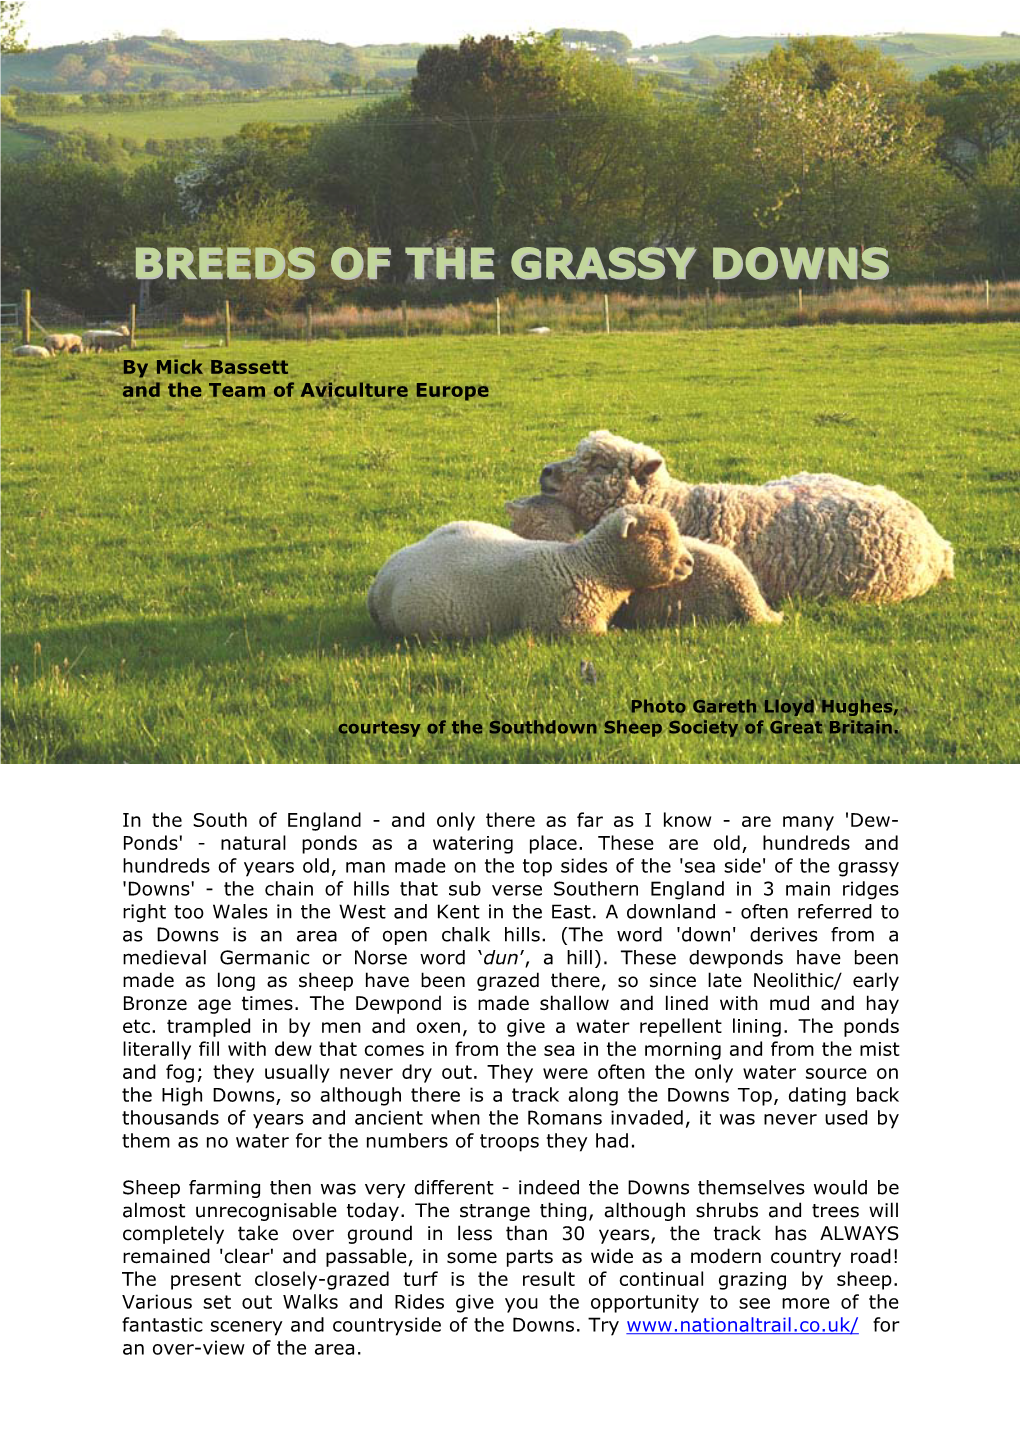 Breeds of the Grassy Downs’